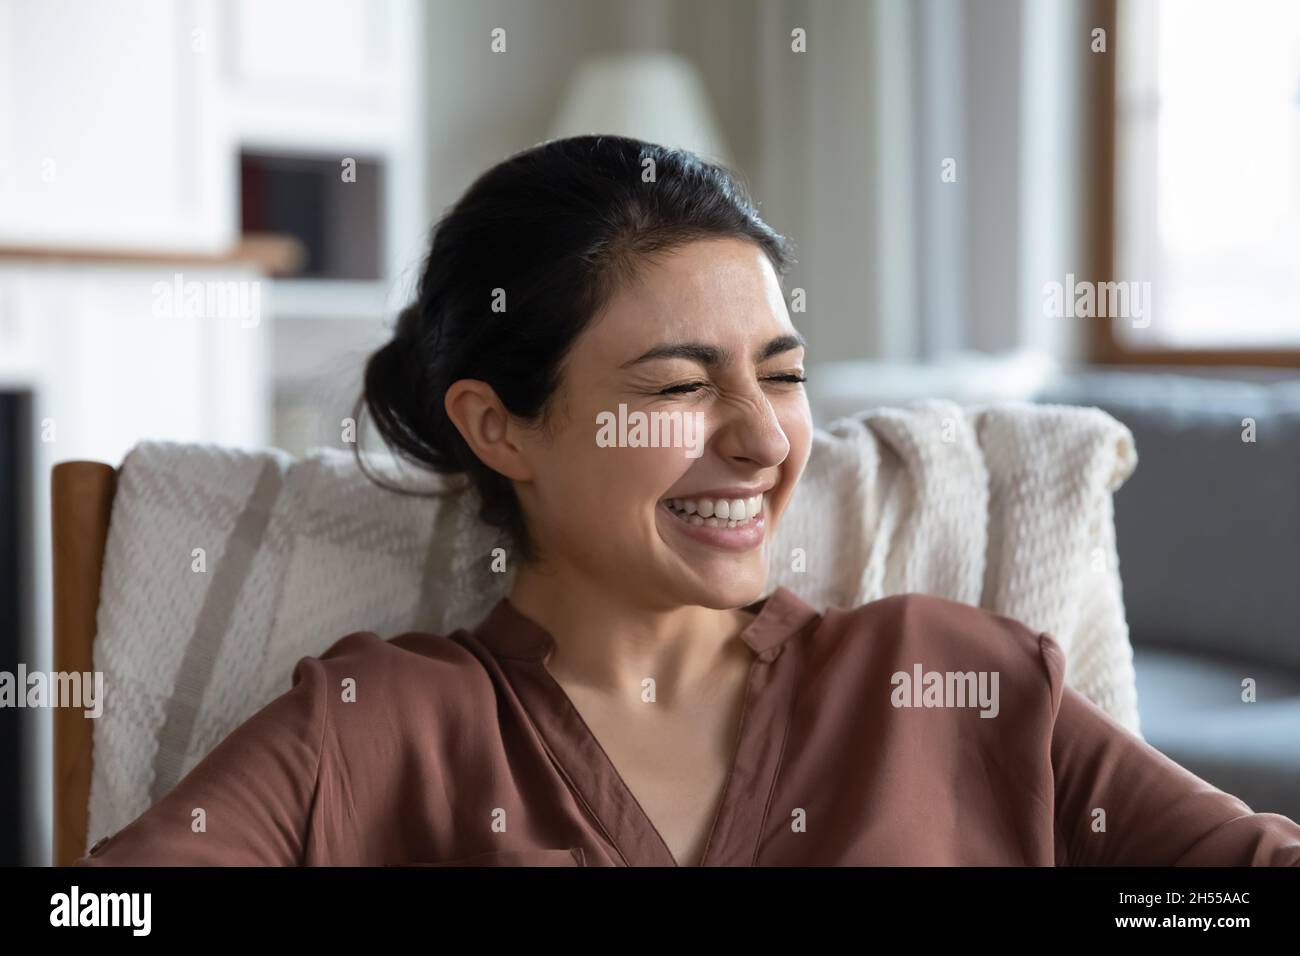 Close up image of laughing young Indian ethnicity woman Stock Photo